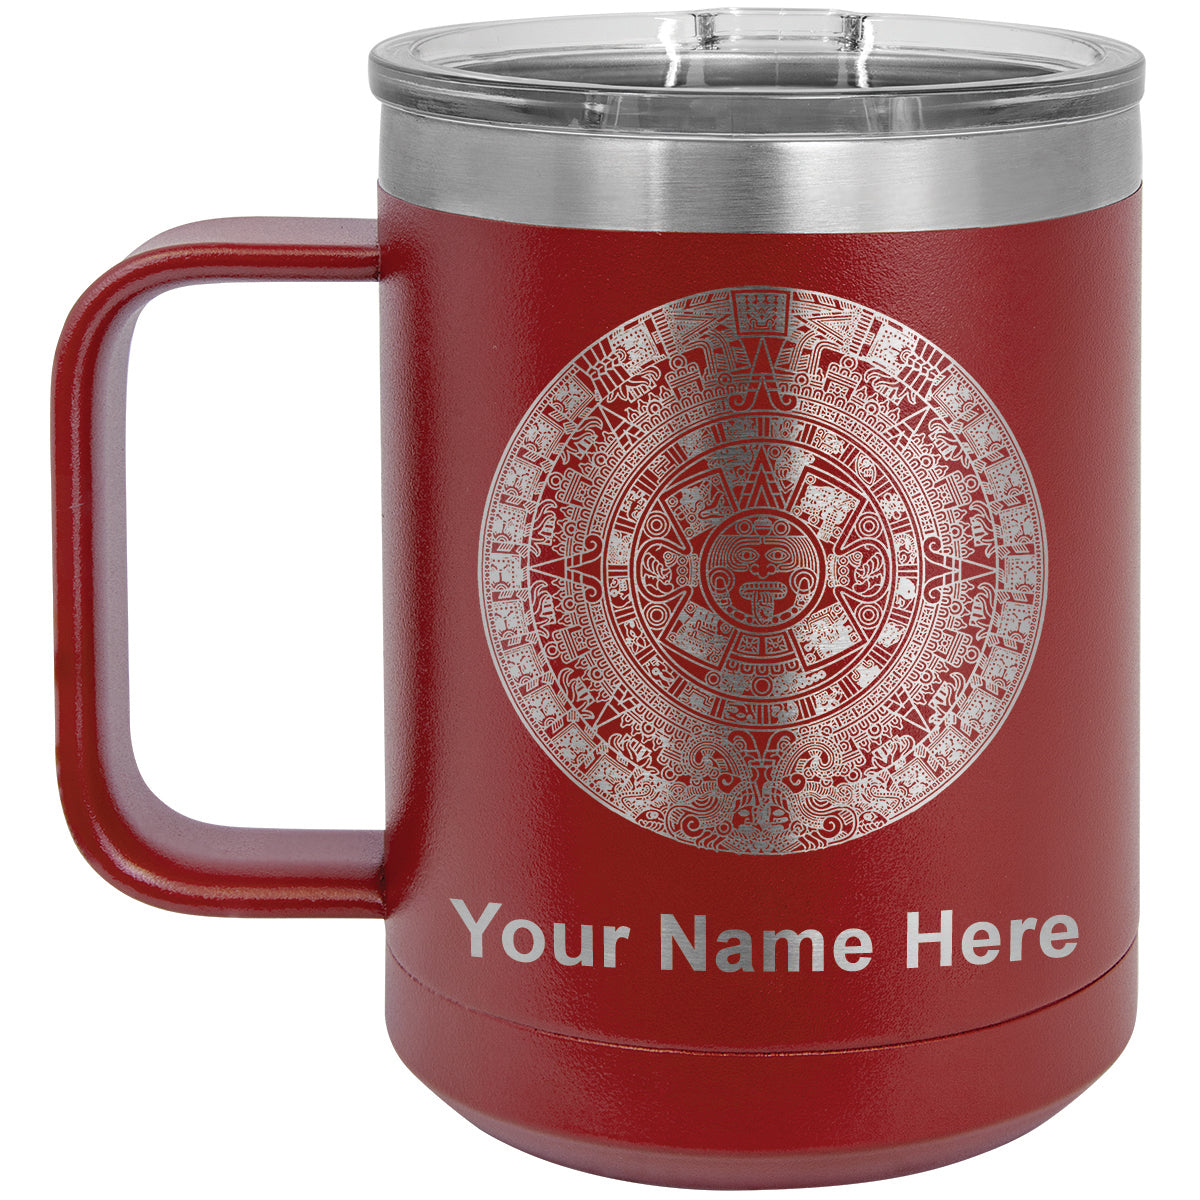 15oz Vacuum Insulated Coffee Mug, Aztec Calendar, Personalized Engraving Included